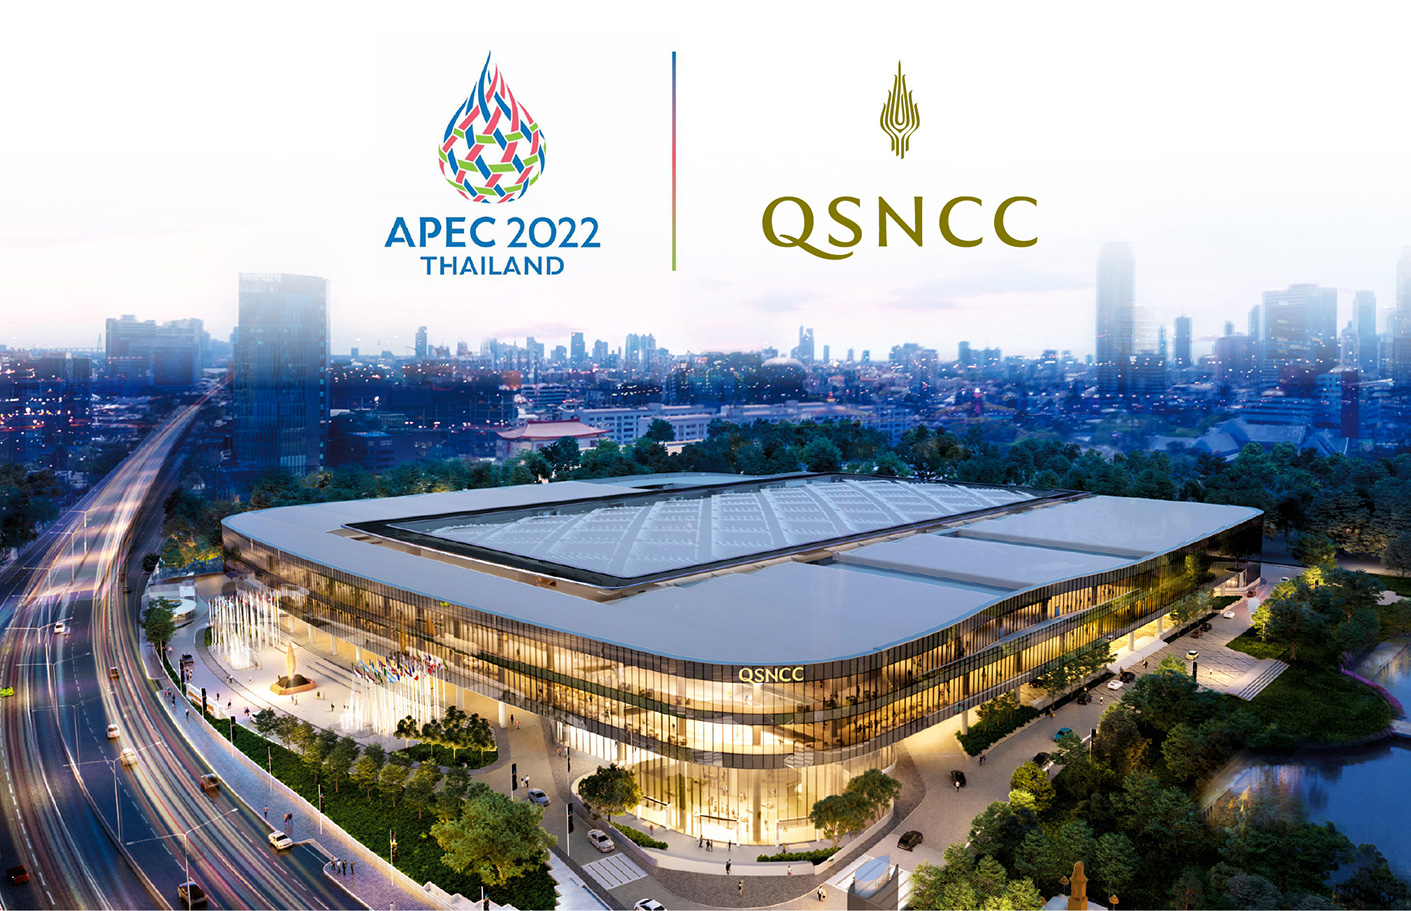 The revived QSNCC is ready to reopen for APEC in September 2022